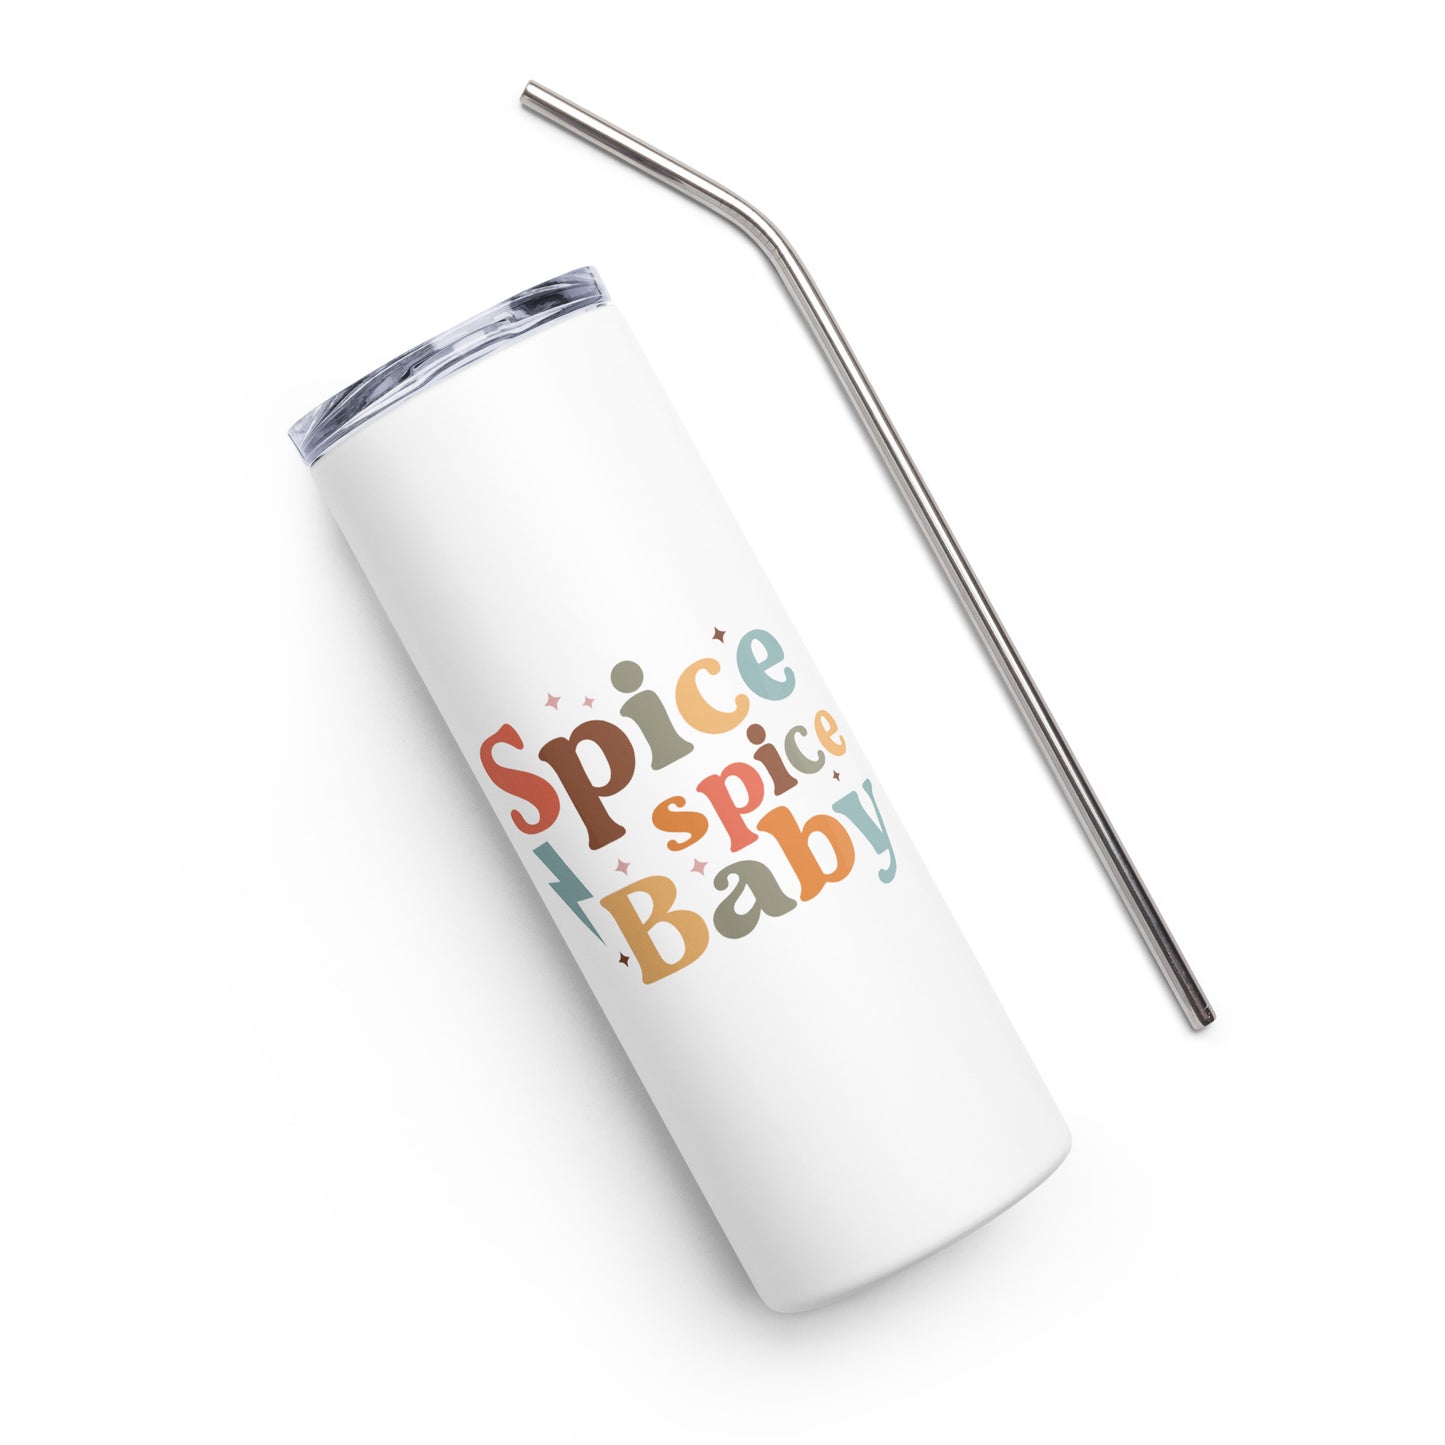 Spice Spice Baby Stainless steel tumbler